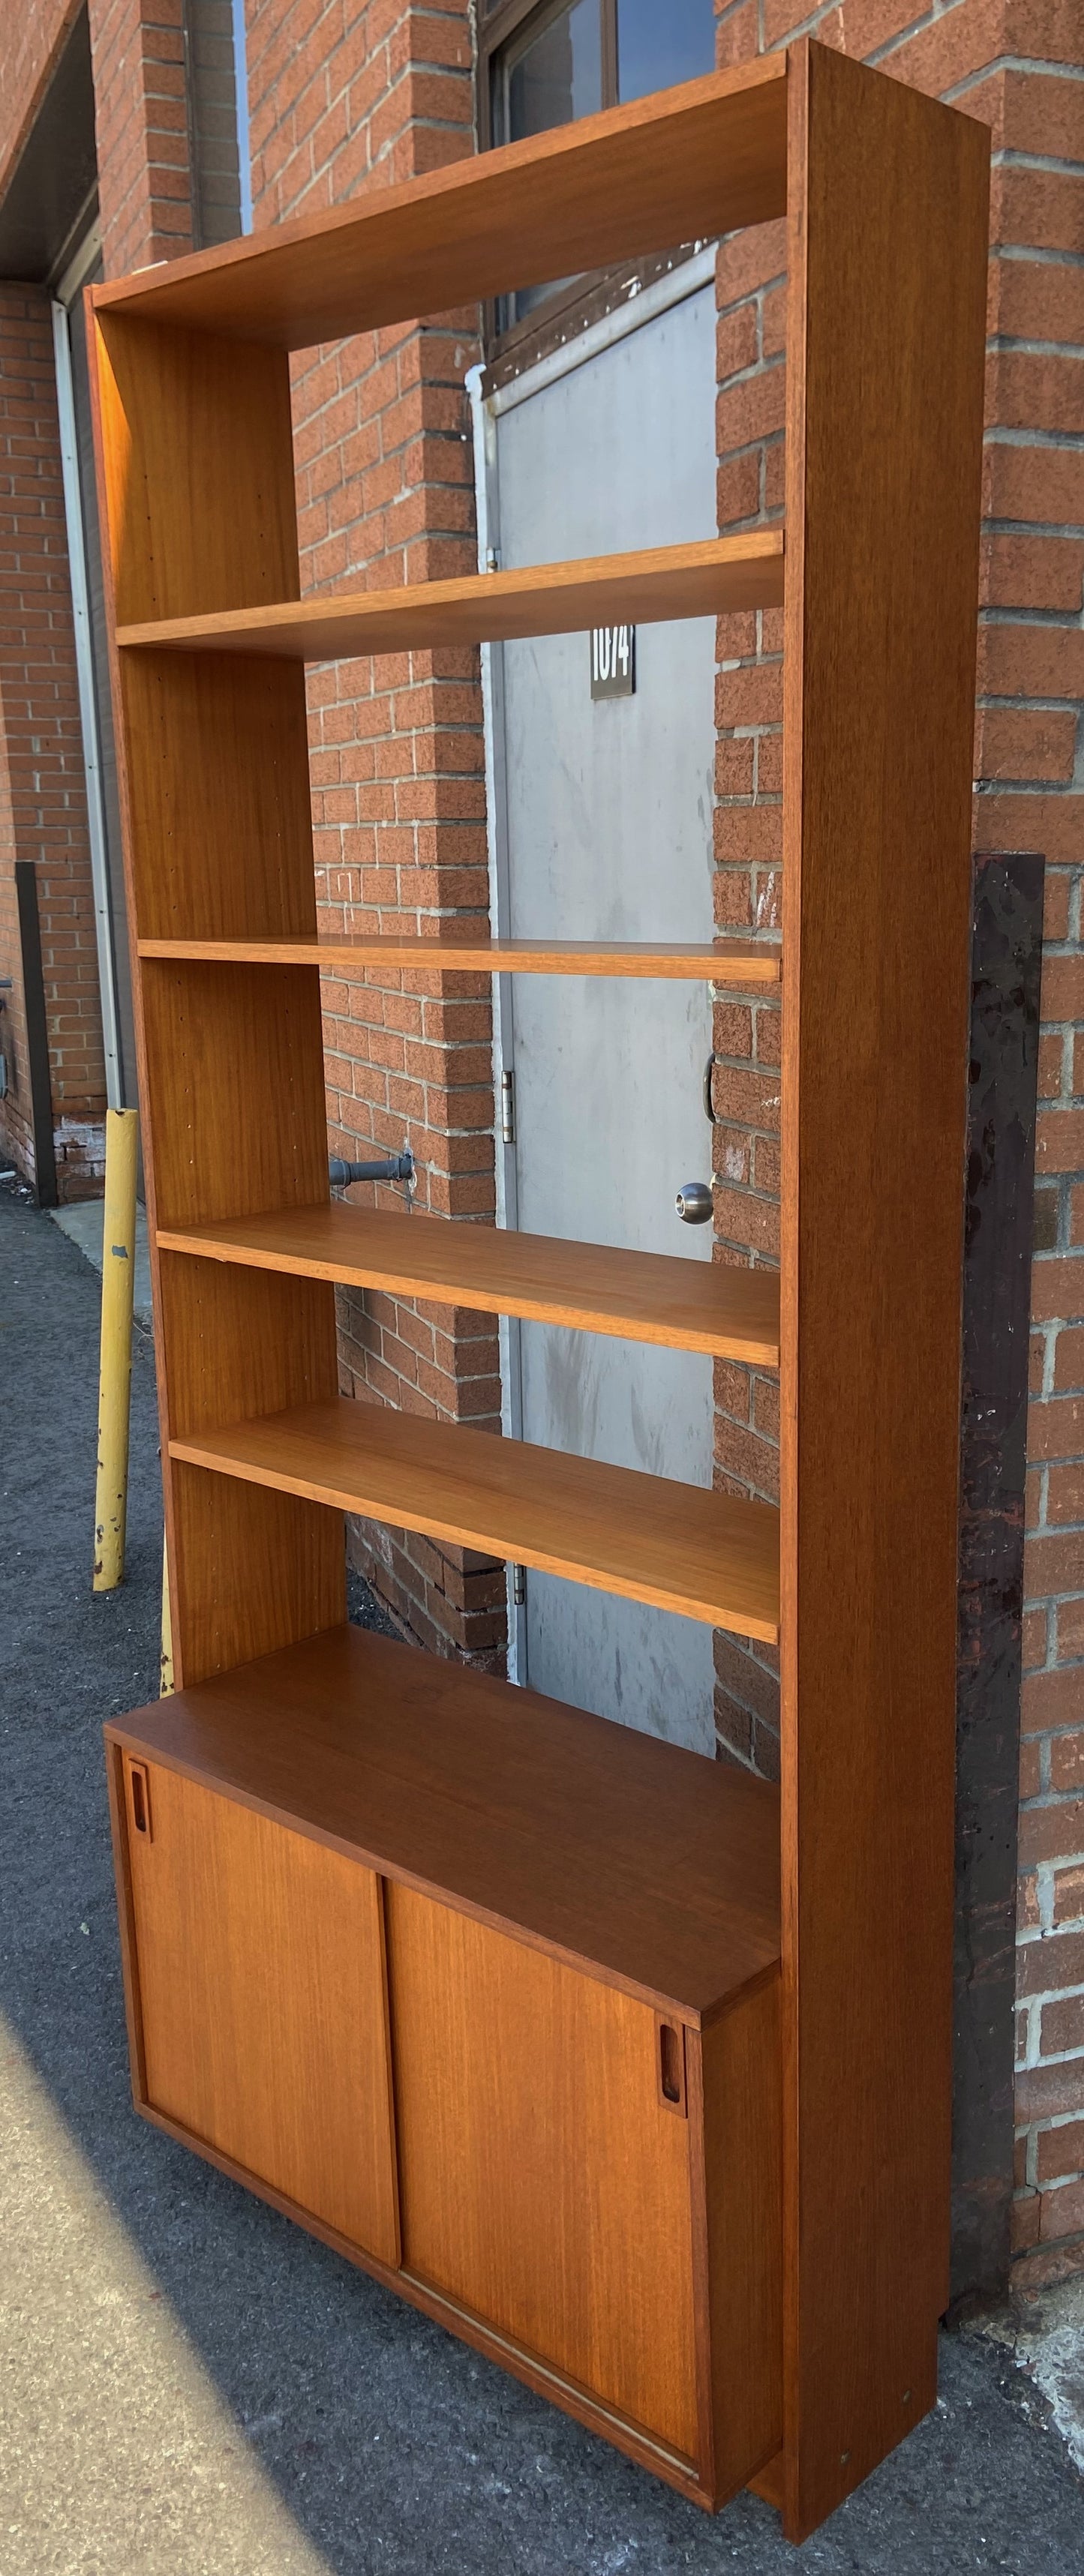 REFINISHED Mid Century Modern Teak Shelving Unit, made in Finland